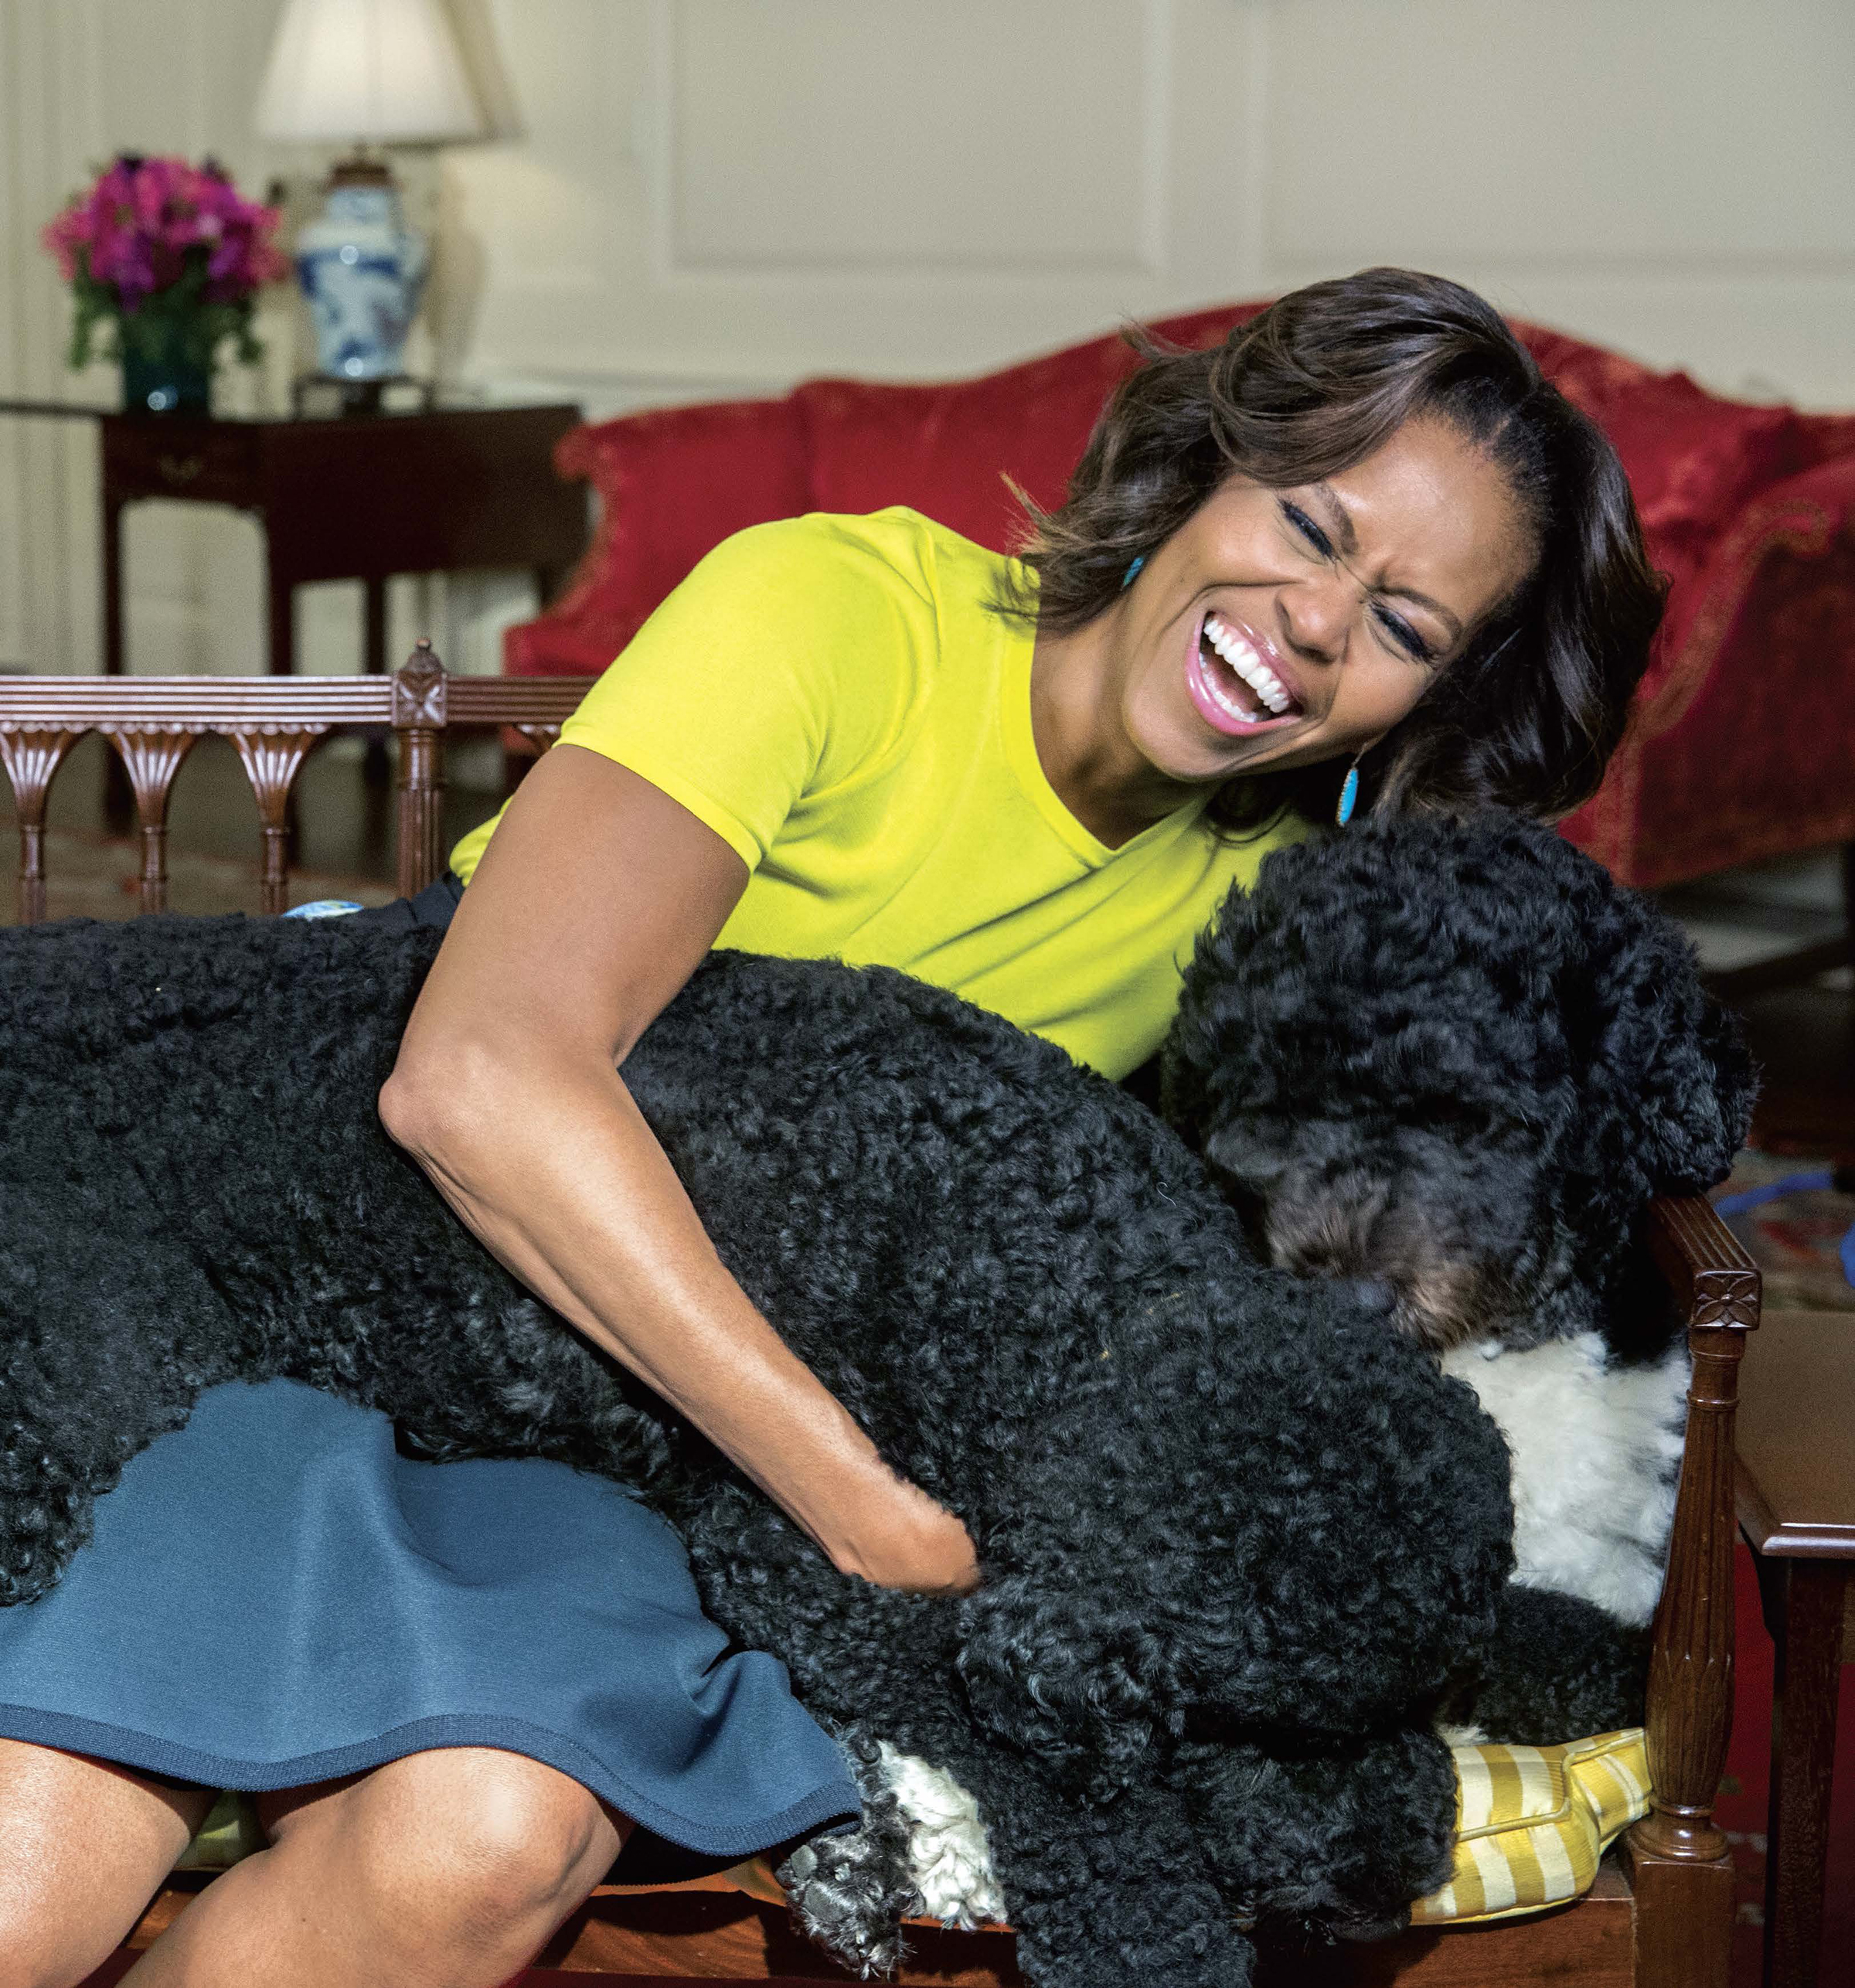 PHOTO: White House photographer Amanda Lucidon included a candid photo of Michelle Obama laughing with the first dogs in her new book, "Chasing Light."